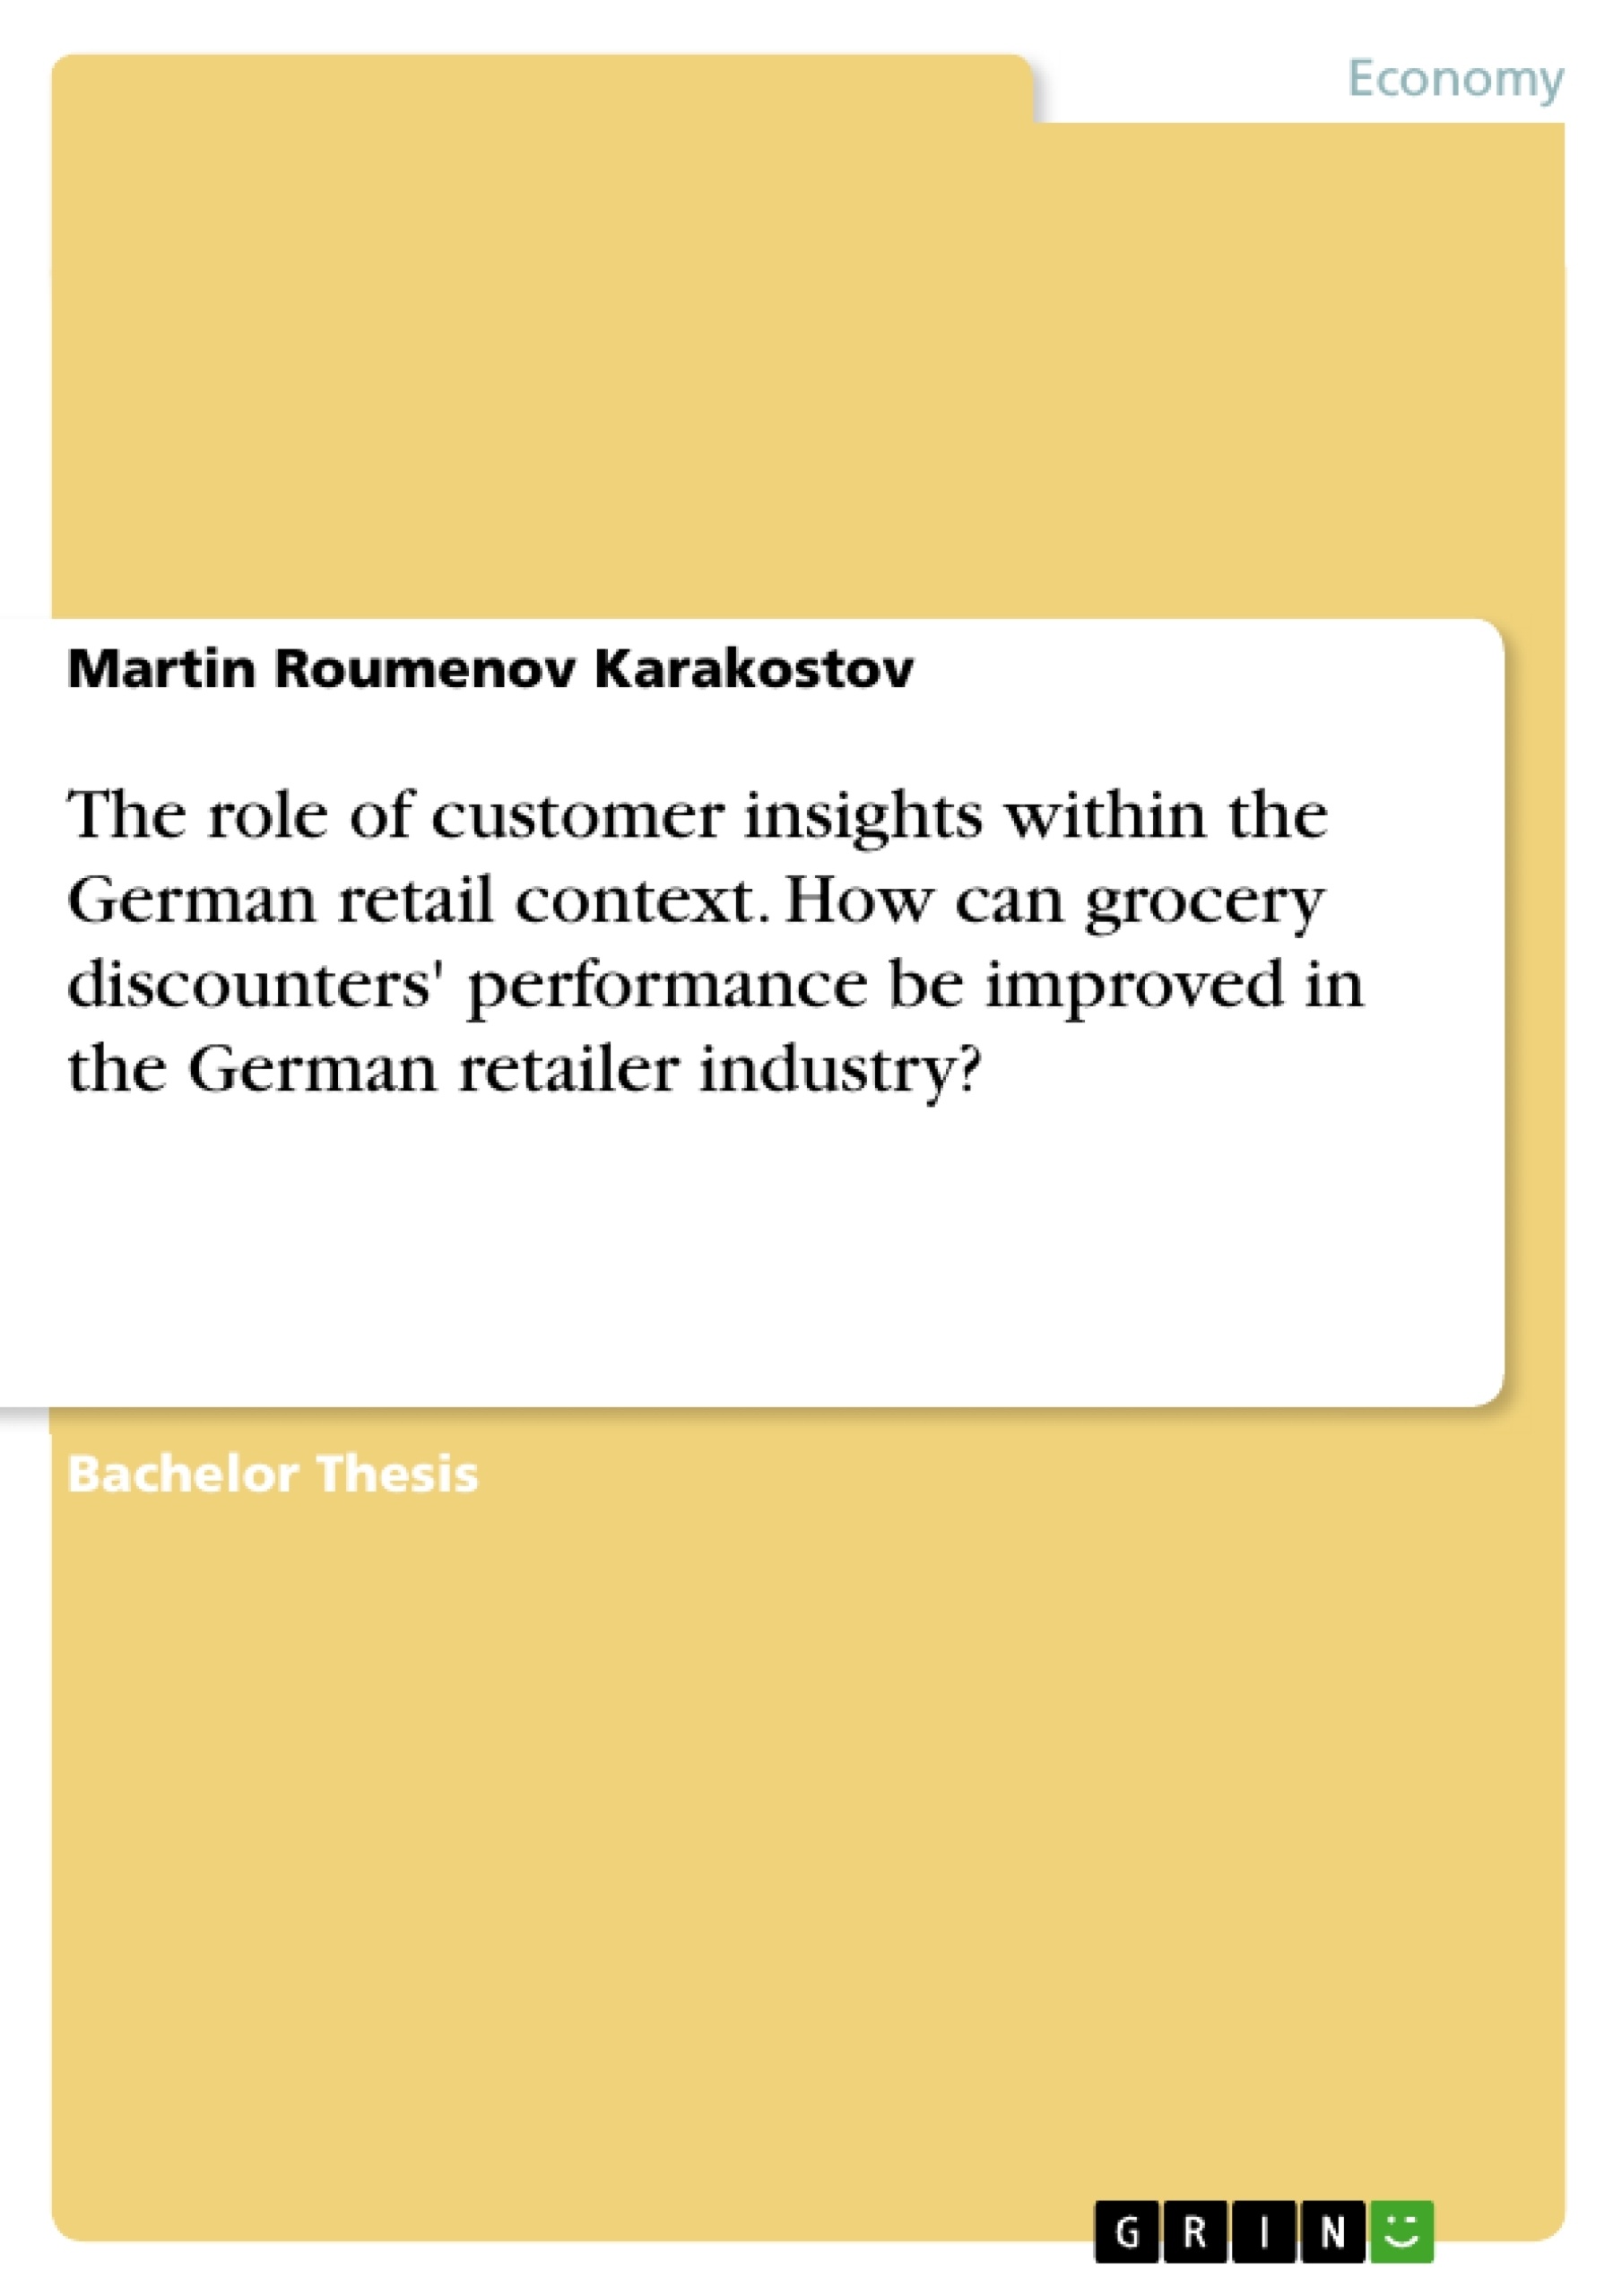 Titel: The role of customer insights within the German retail context. How can grocery discounters' performance be improved in the German retailer industry?